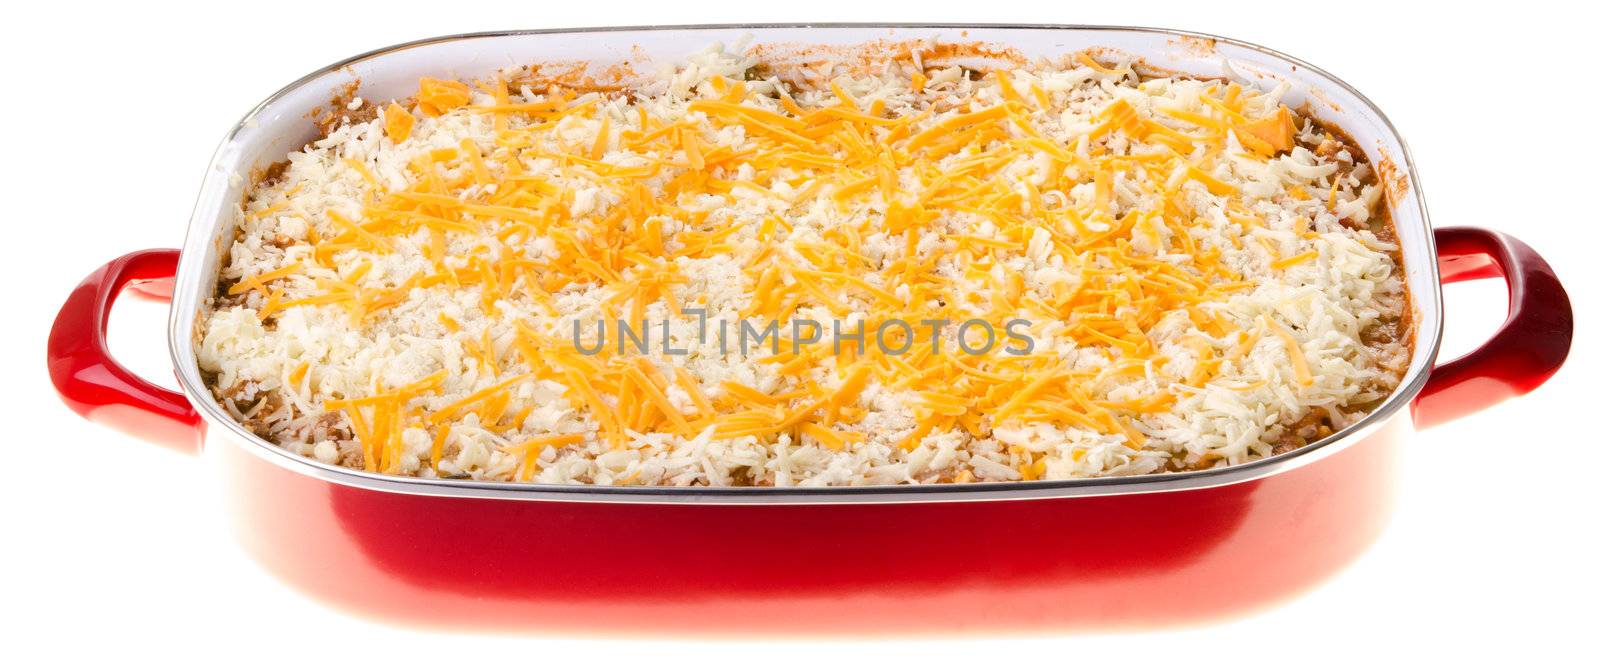 A dish of uncooked lasagna isolated against a white background.